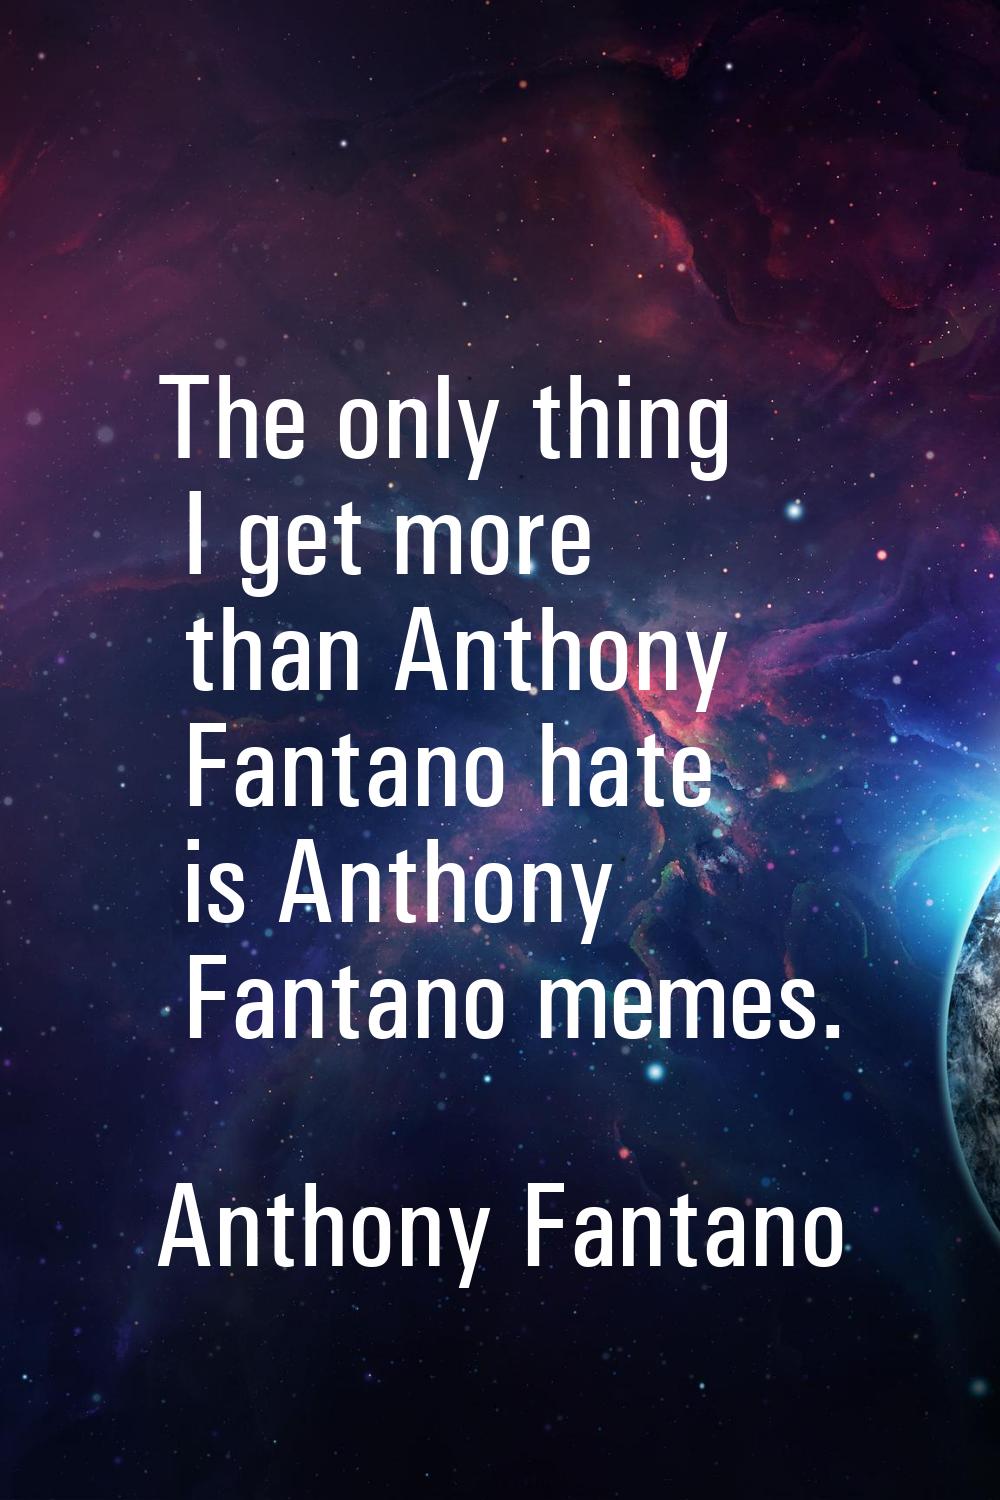 The only thing I get more than Anthony Fantano hate is Anthony Fantano memes.